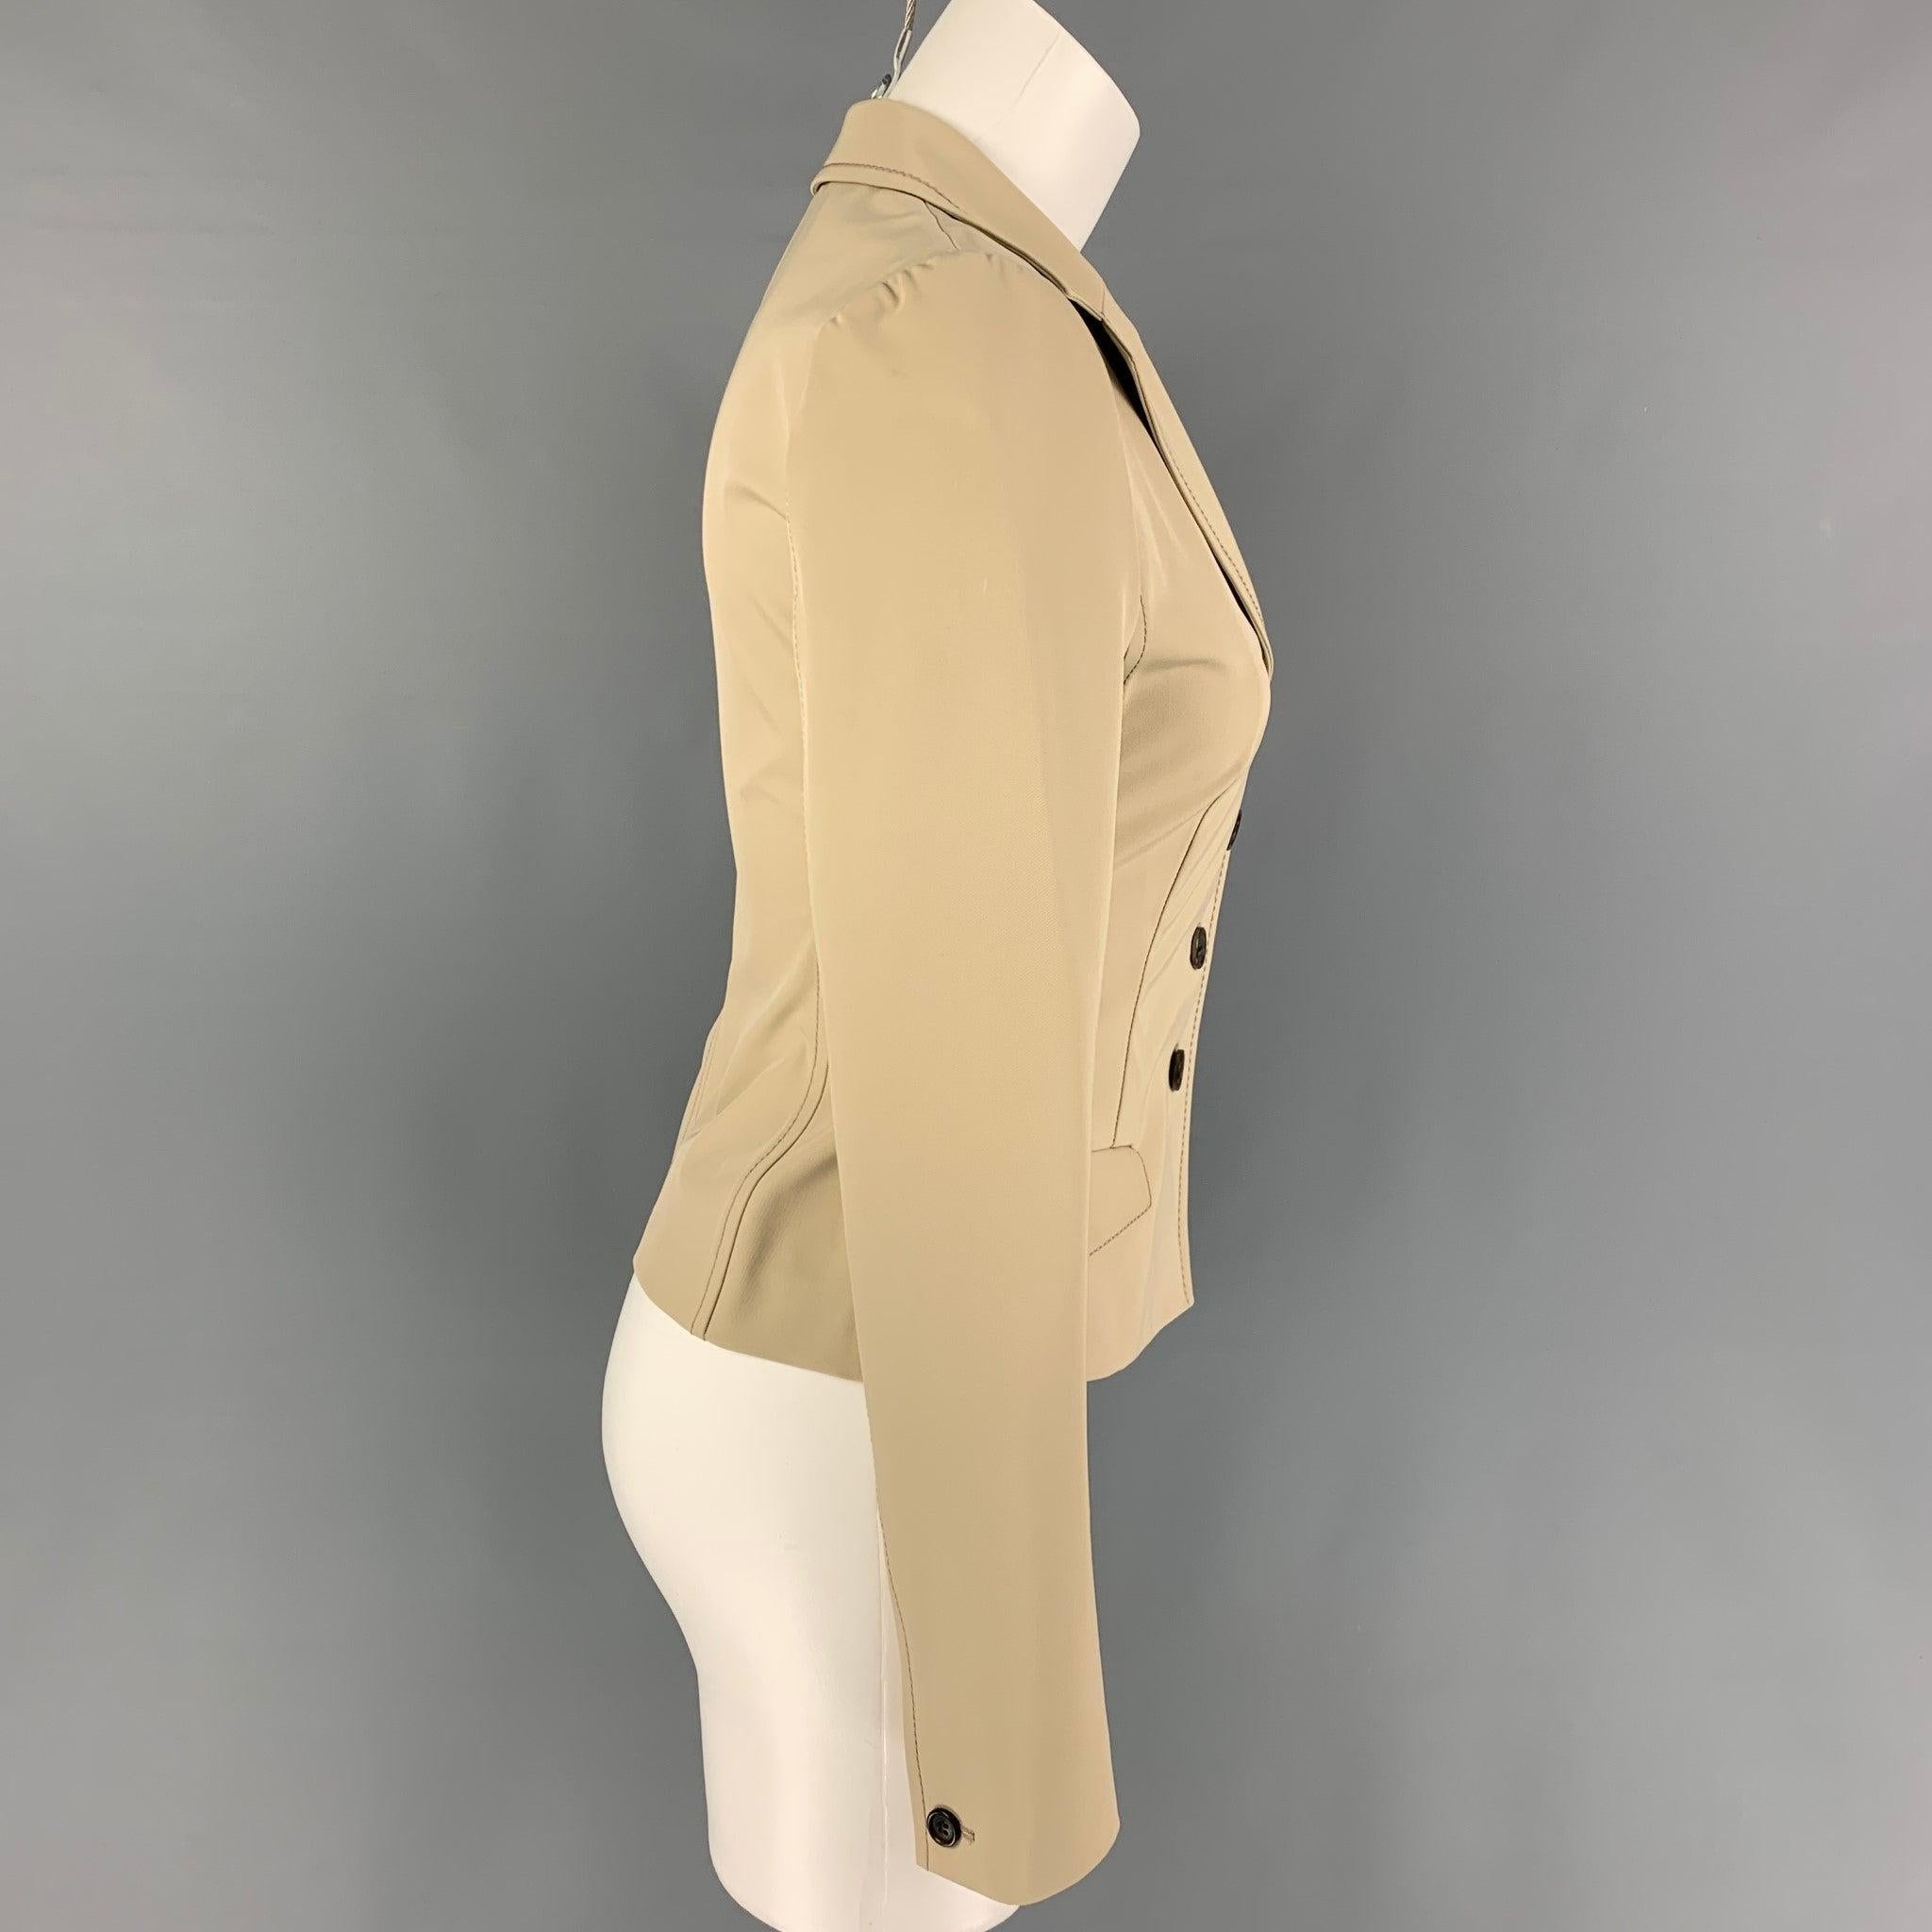 PRADA jacket comes in a beige polyester featuring a notch lapel, contrast stitching, flap pockets, and a buttoned closure. Made in Italy.
Very Good
Pre-Owned Condition. 

Marked:   40 

Measurements: 
 
Shoulder: 15 inches  Bust: 32 inches  Sleeve: